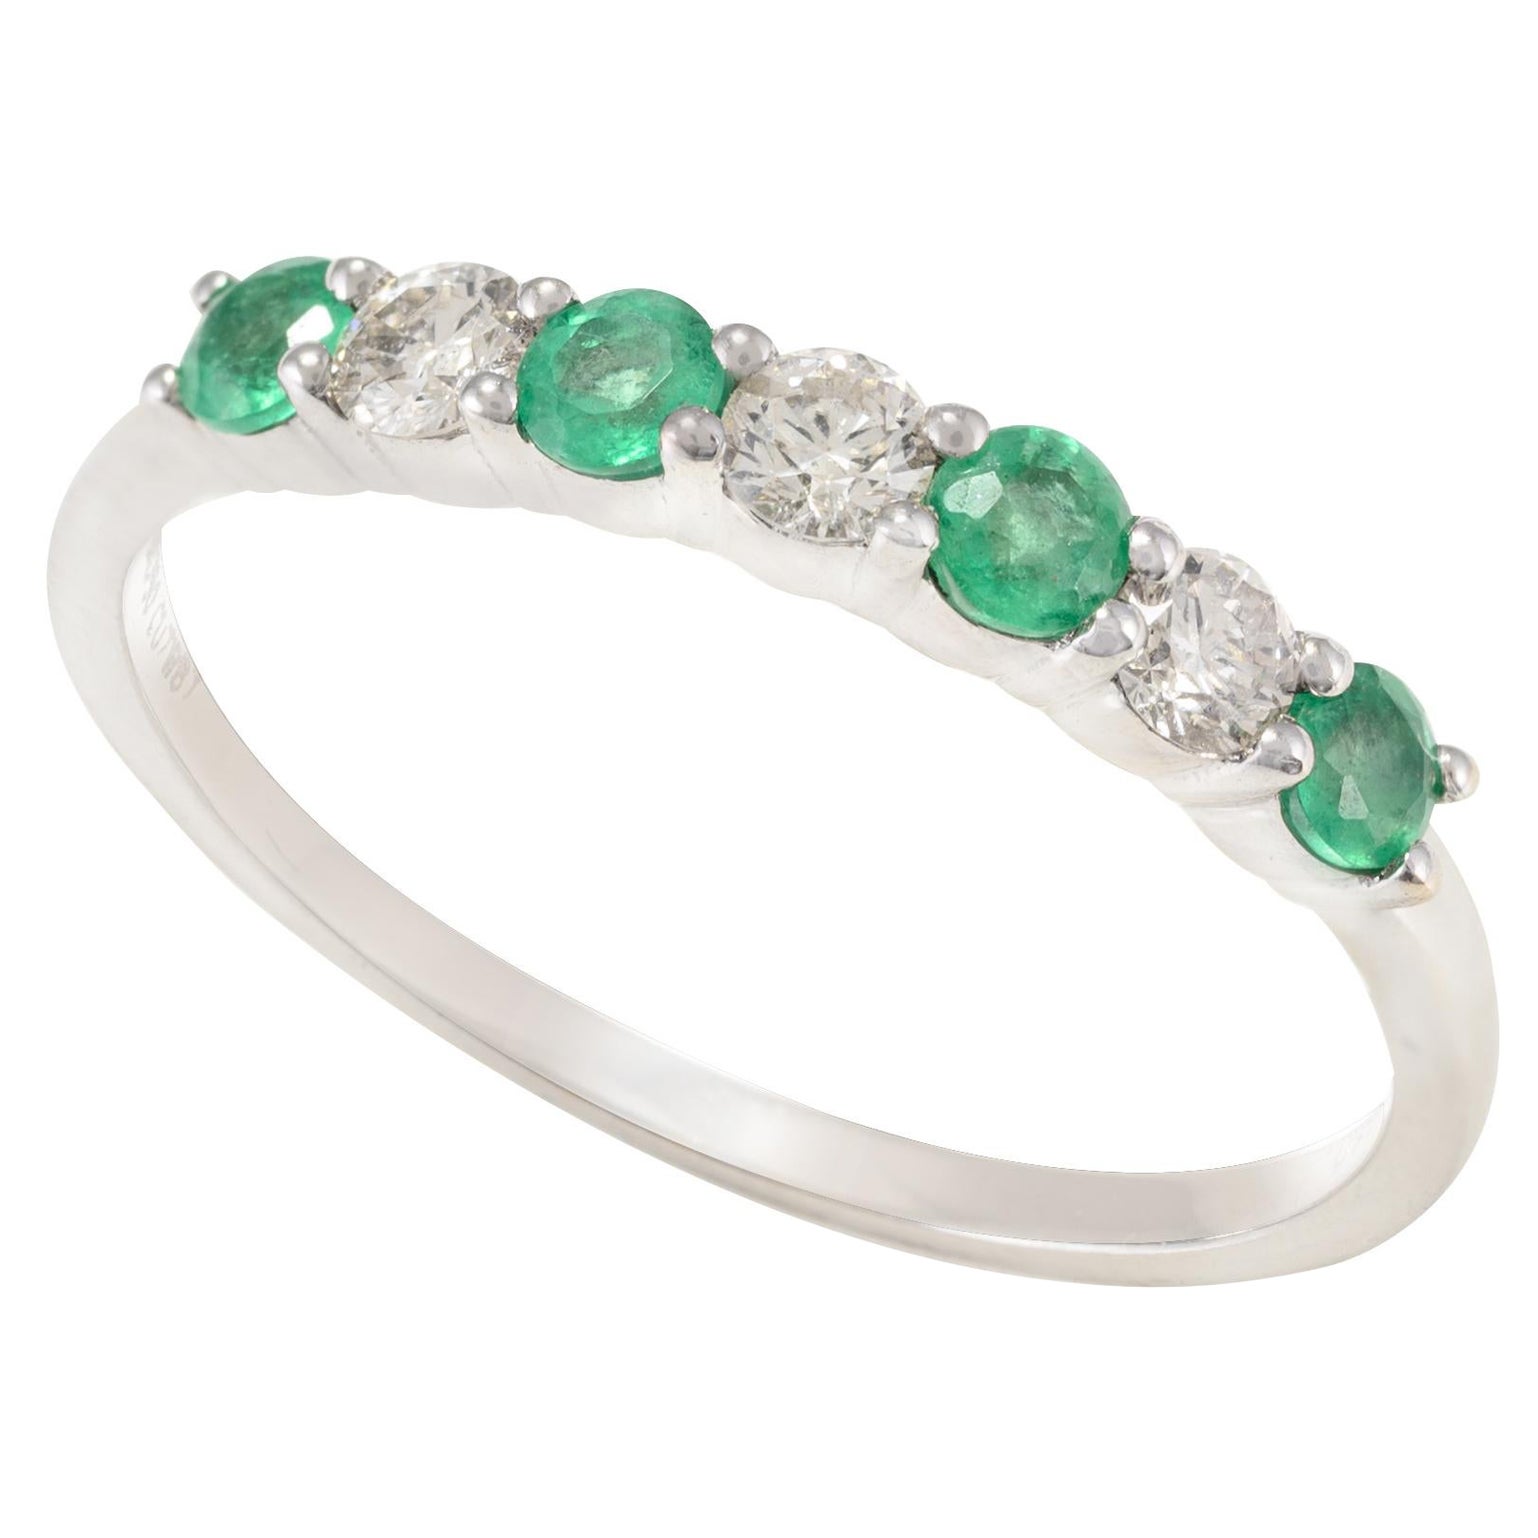 For Sale:  Dainty Natural Emerald and Diamond Band Set in 18k Solid White Gold Setting